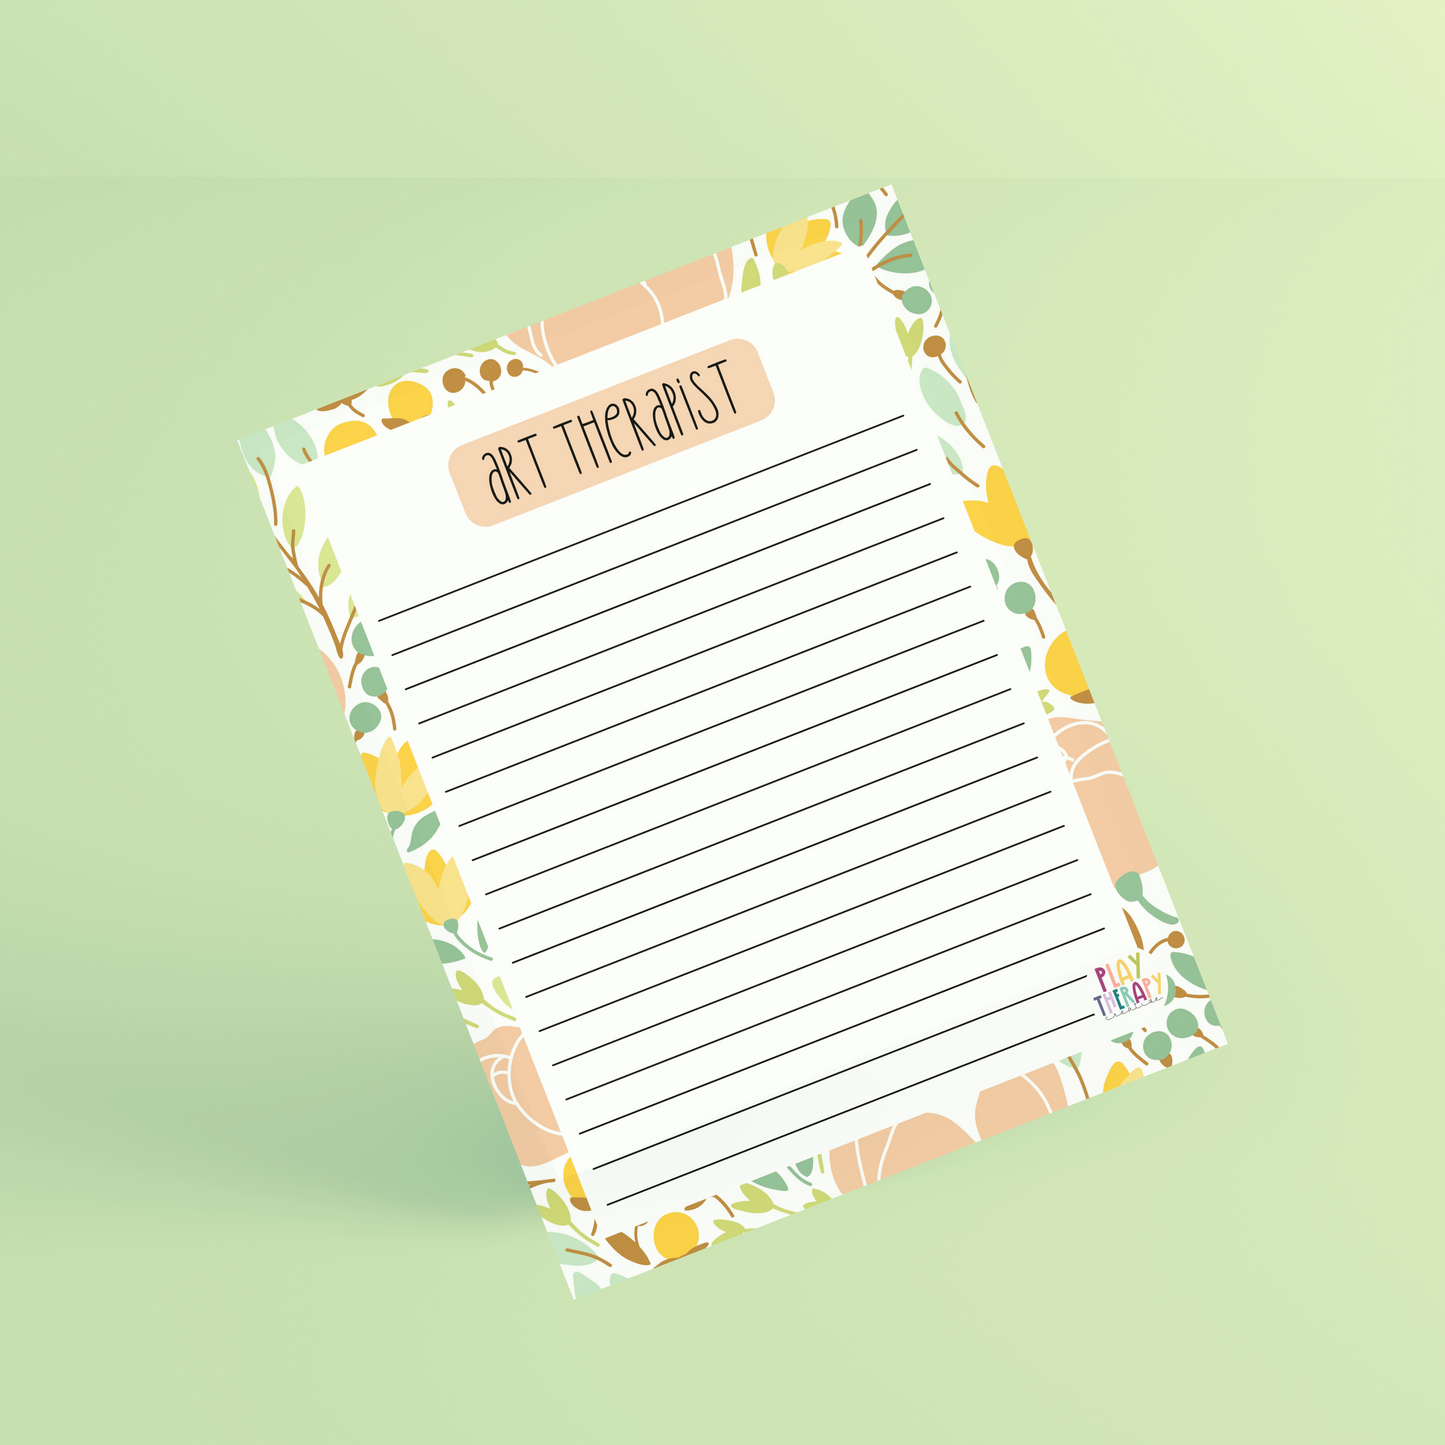 Floral Art Therapist Notepad